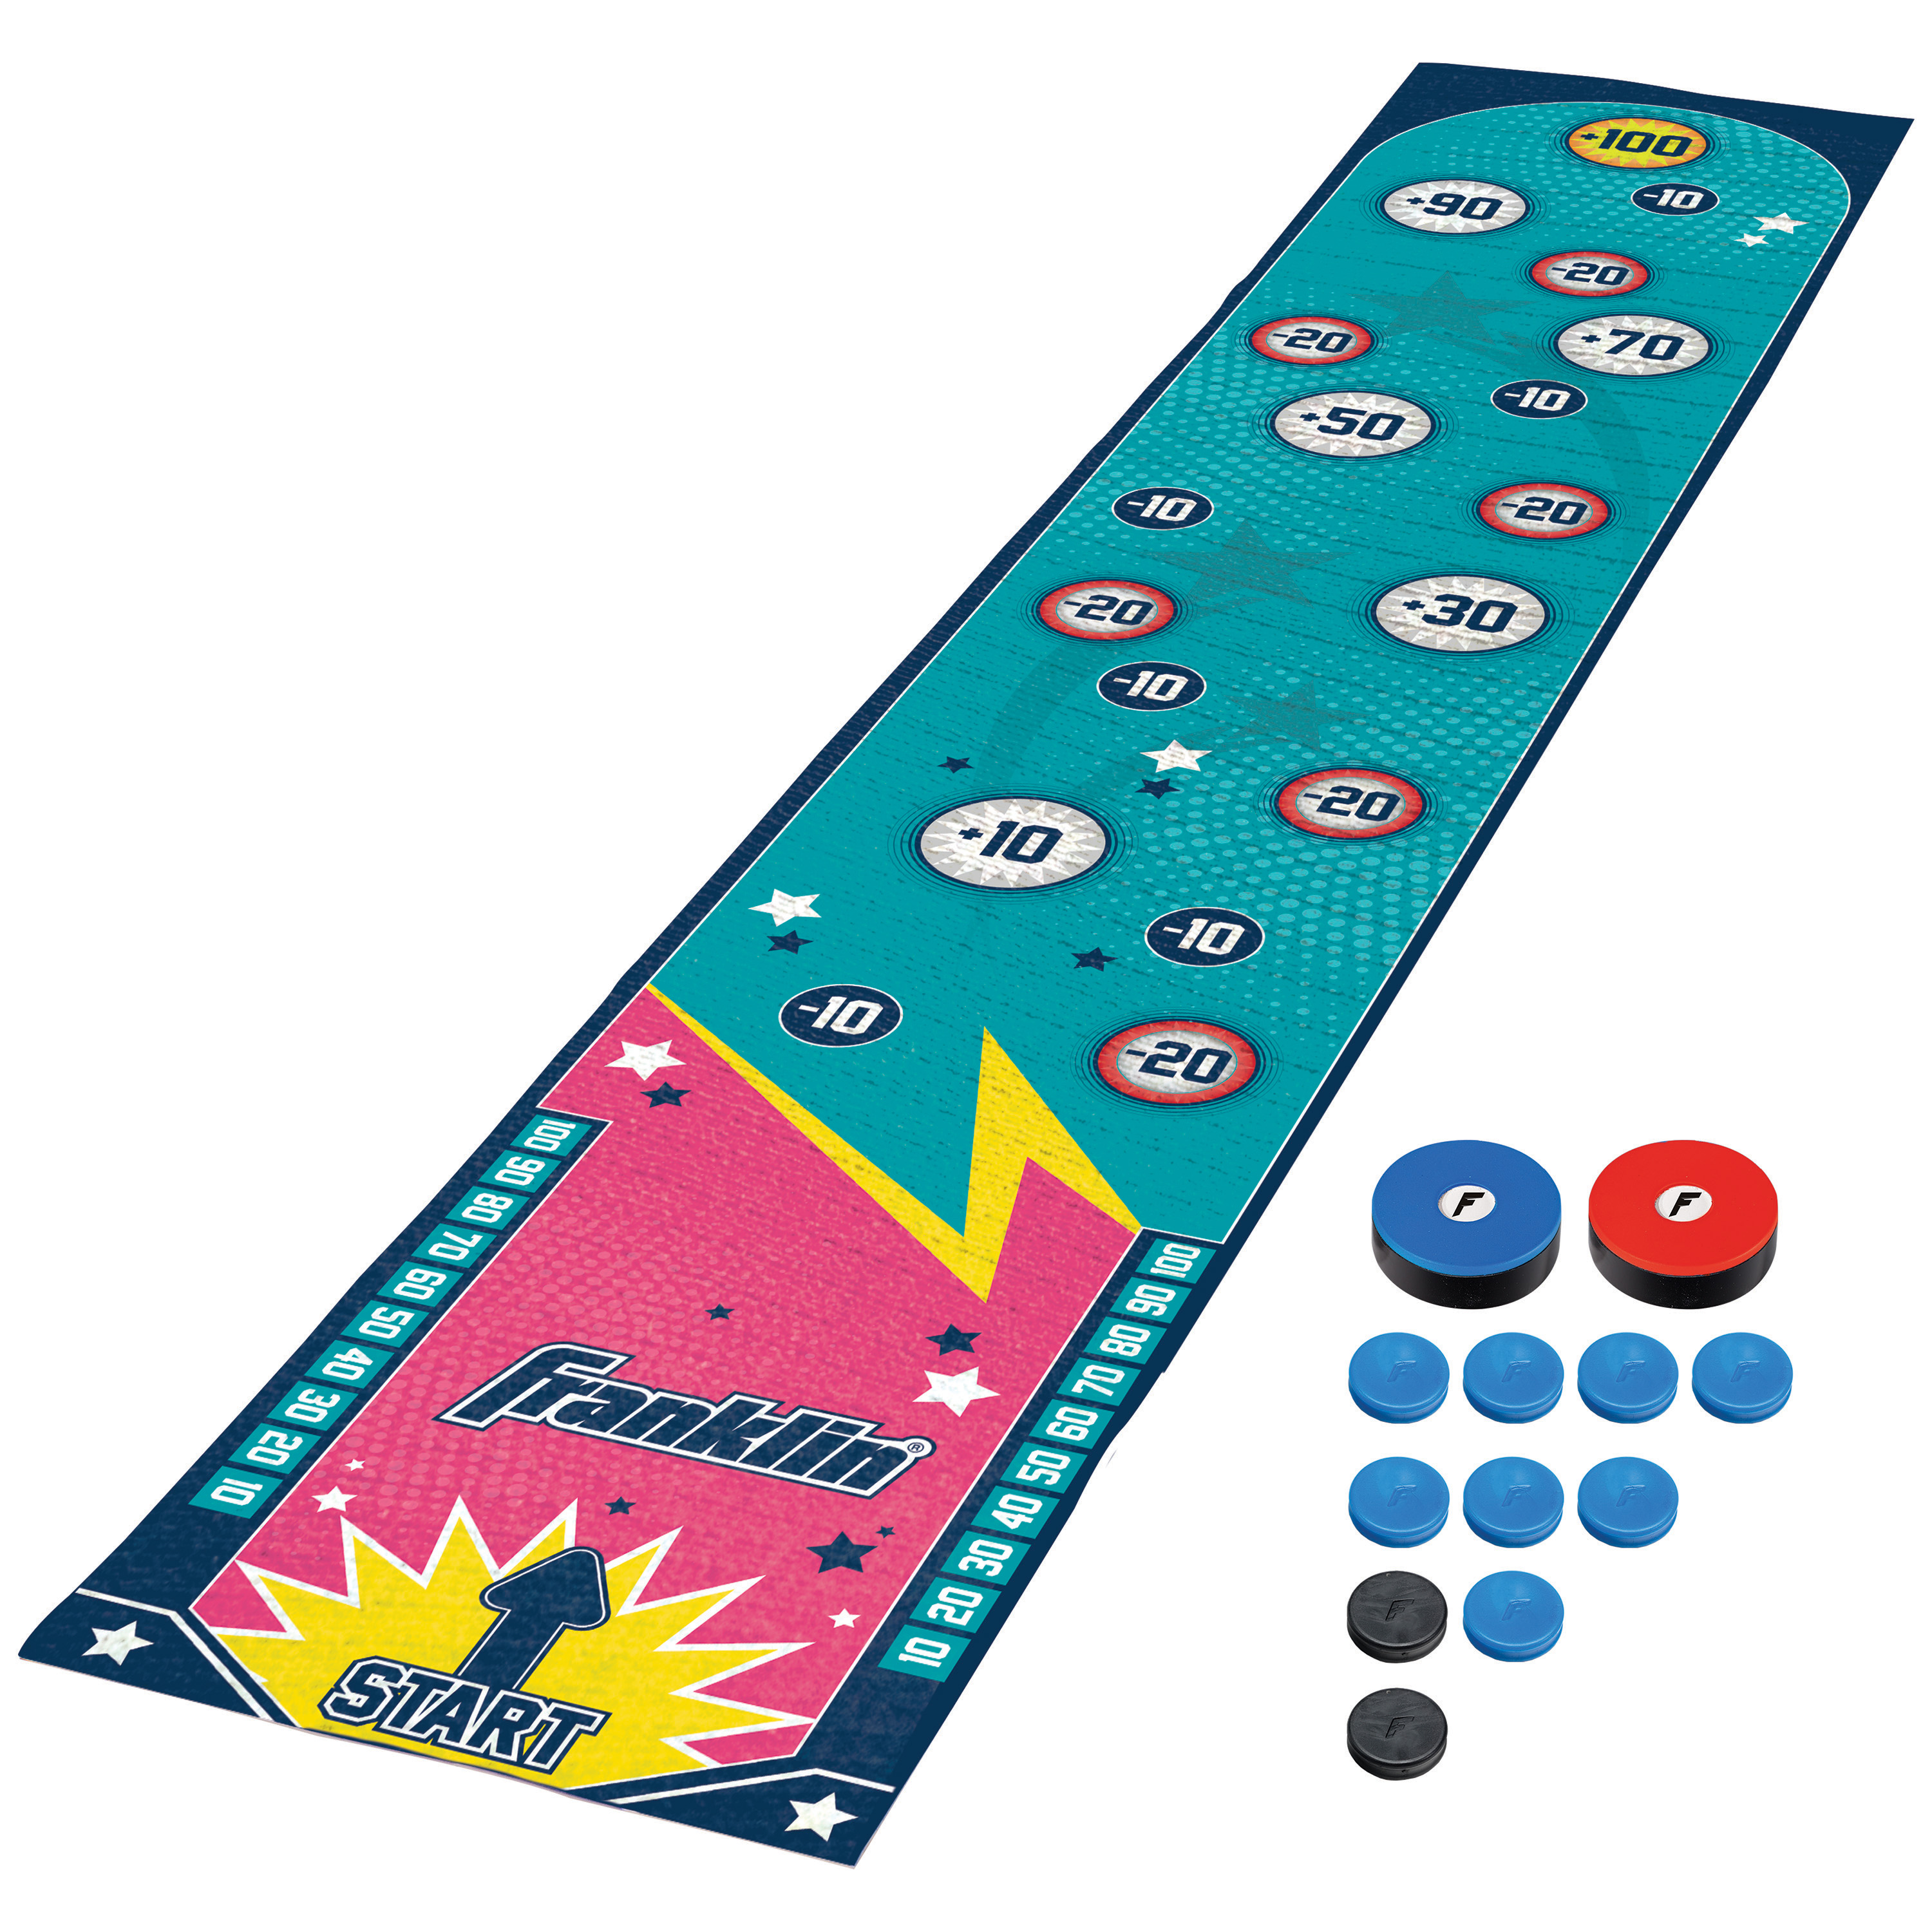 Franklin Sports Arcade Table Game - Indoor Arcade Mat Game For Kids And Adults - Includes 2 Arcade Pucks 8 Game Altering Pucks - 6 Foot Mat That Pucks Easily Slide On - Rolls Up For Storage - image 1 of 1